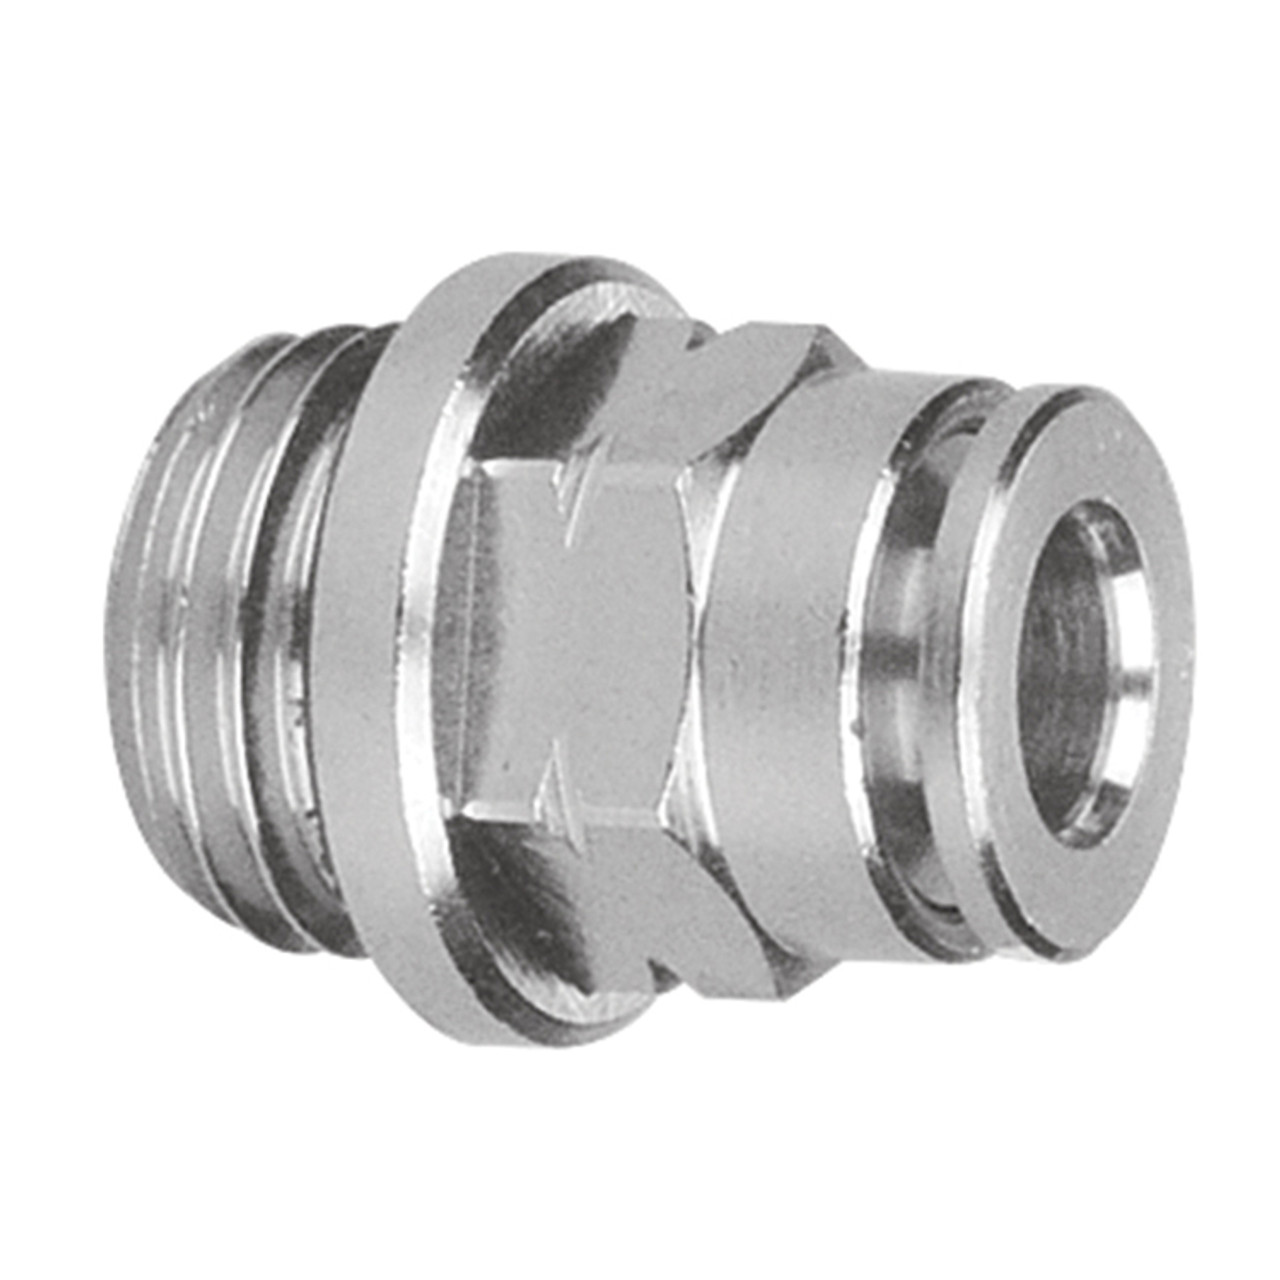 1/2 x 1/2" Nickel Plated Brass Uni Thread - Push-To-Connect Connector   G60018P-08-08